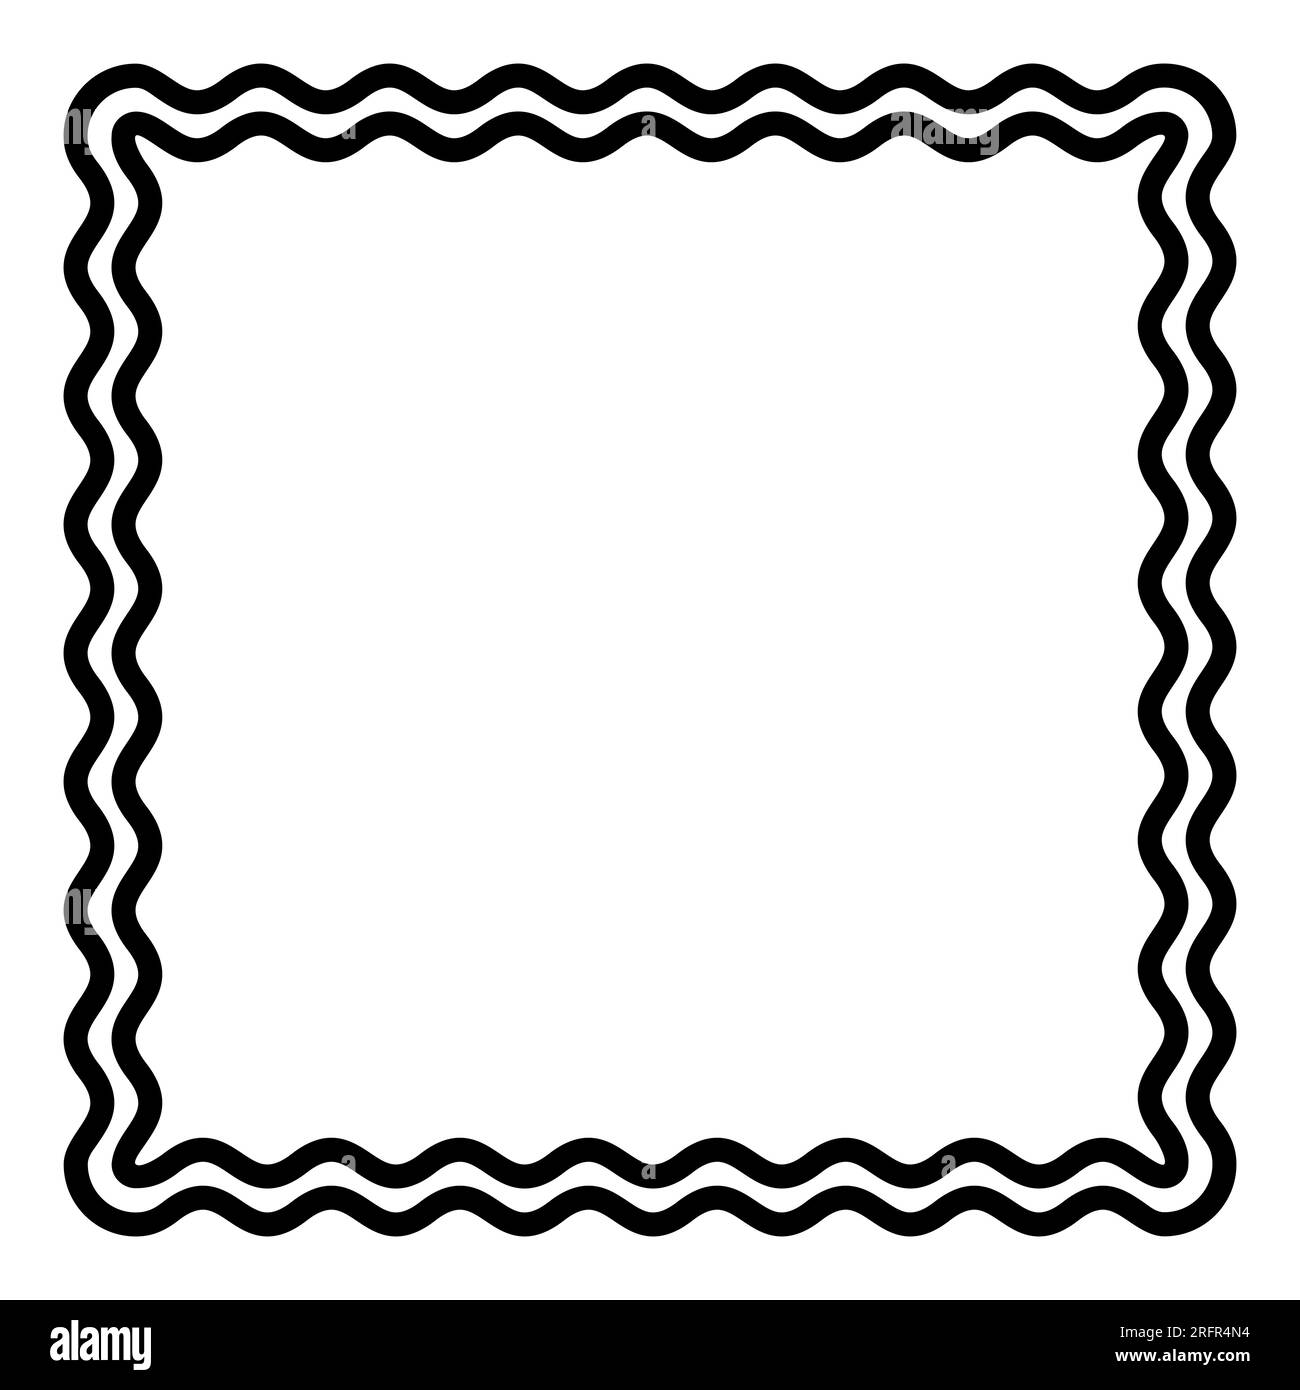 Two bold wavy lines forming a square frame. Decorative and snake-like border, made by two serpentine lines. Isolated black and white illustration. Stock Photo